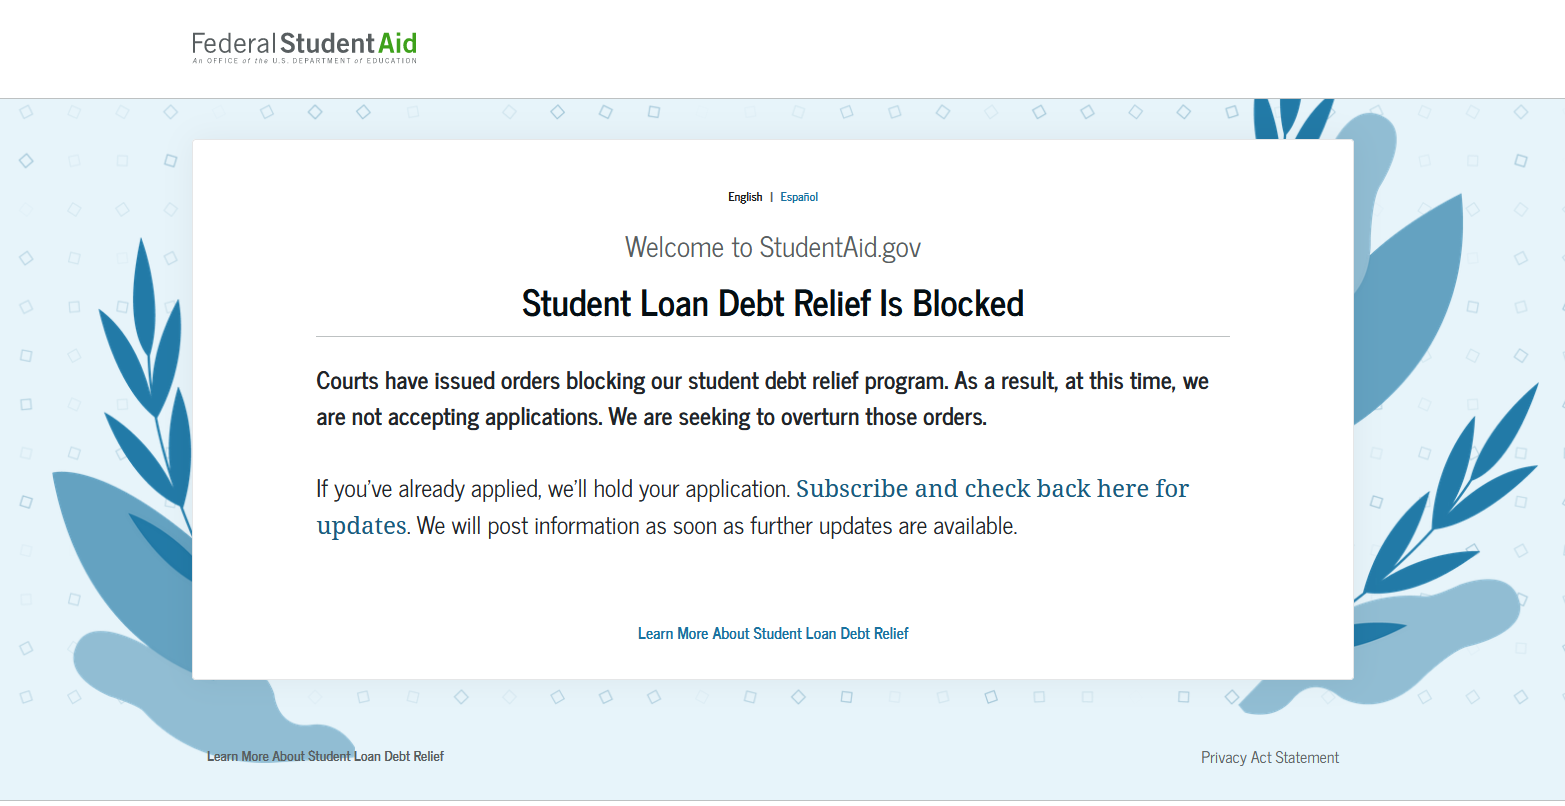 Federal Loan Debt Relief - Blocked | Penn State Office of Student Aid